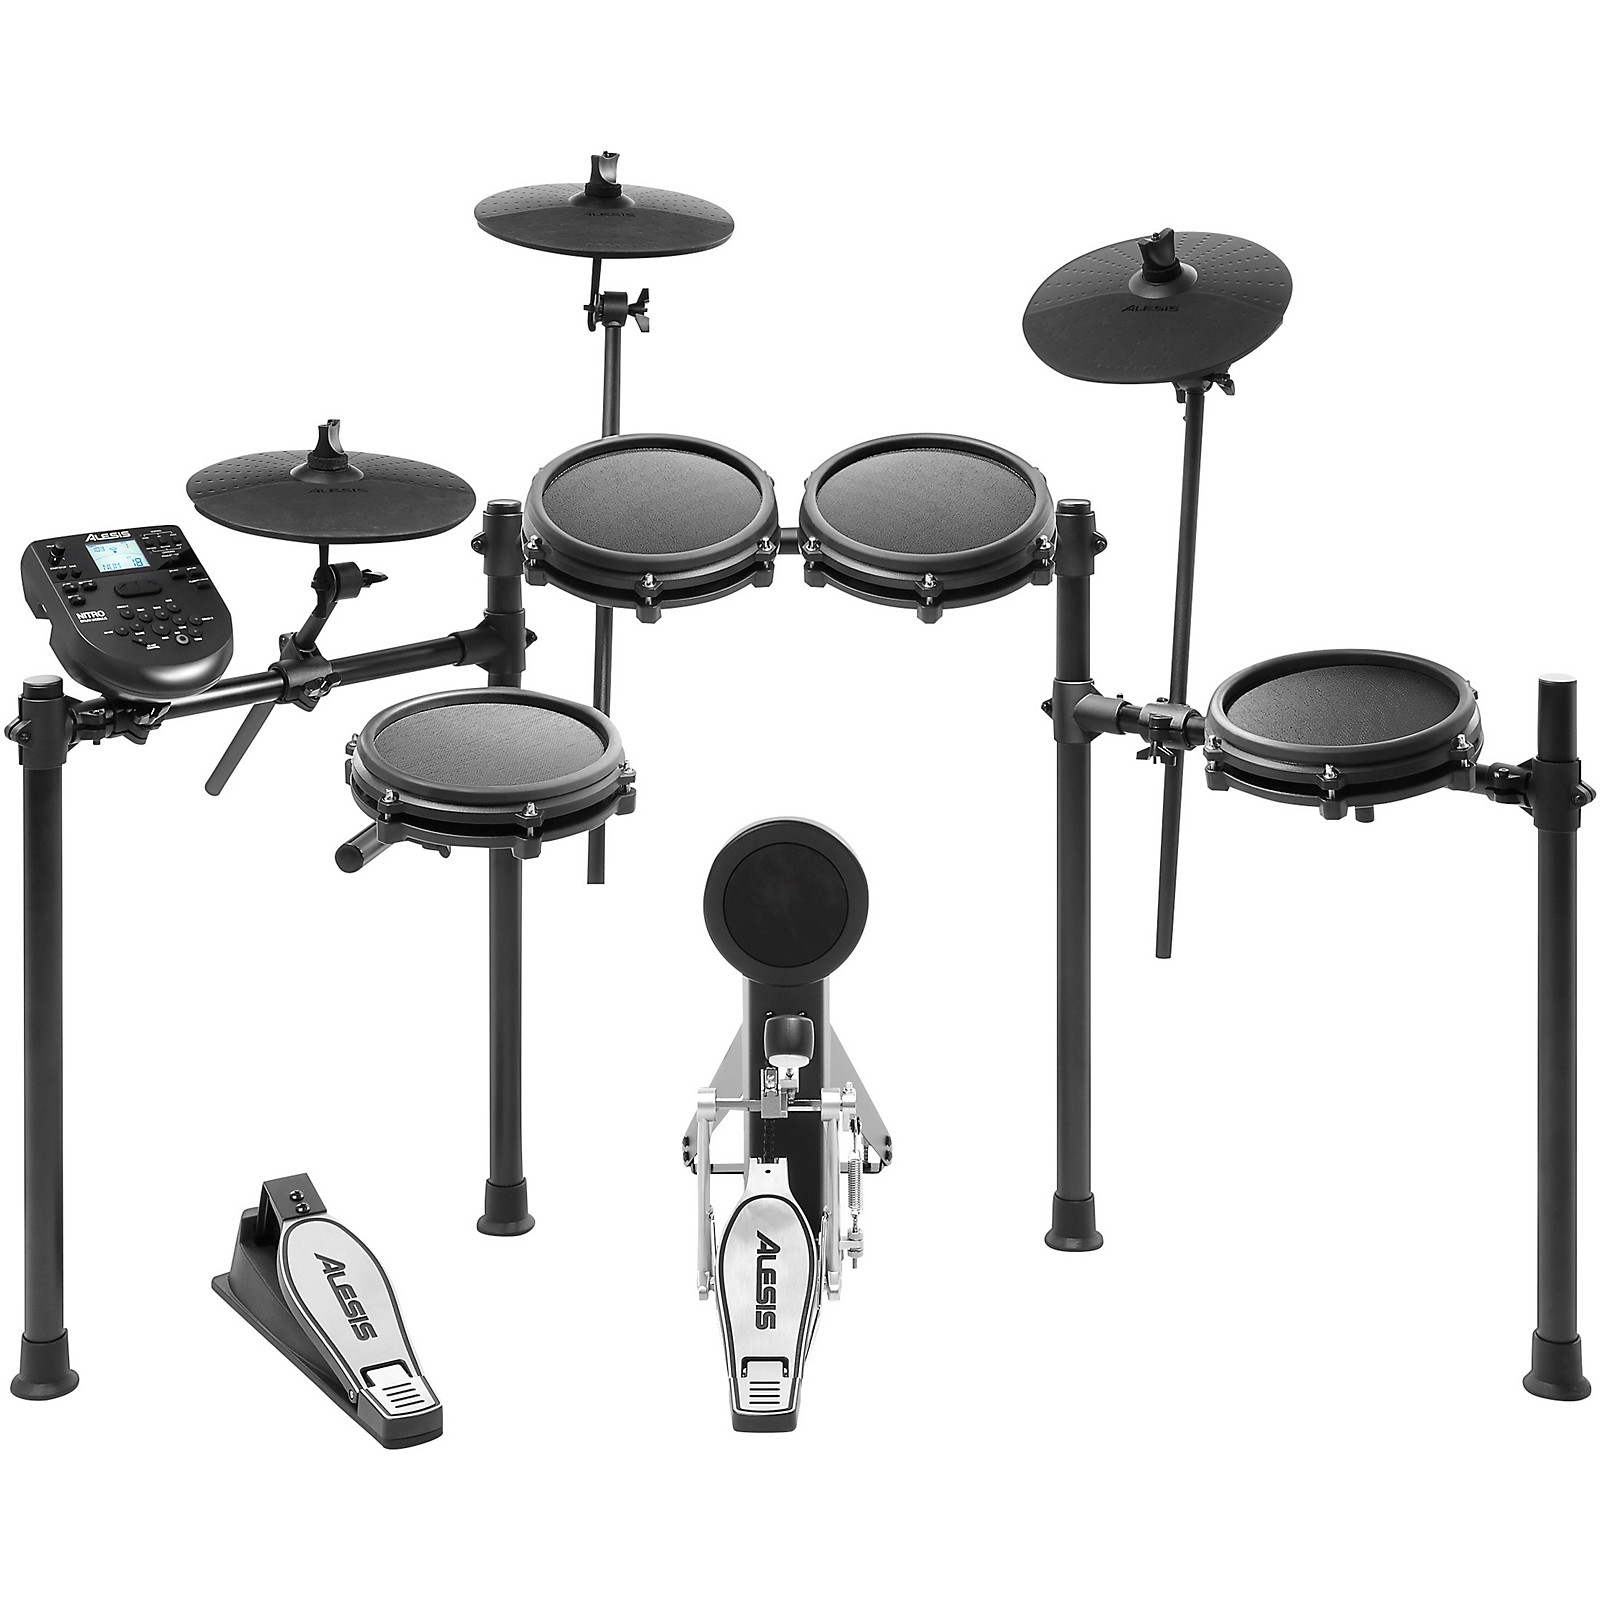 lexicon The other day Arena digital drum set for beginners ...